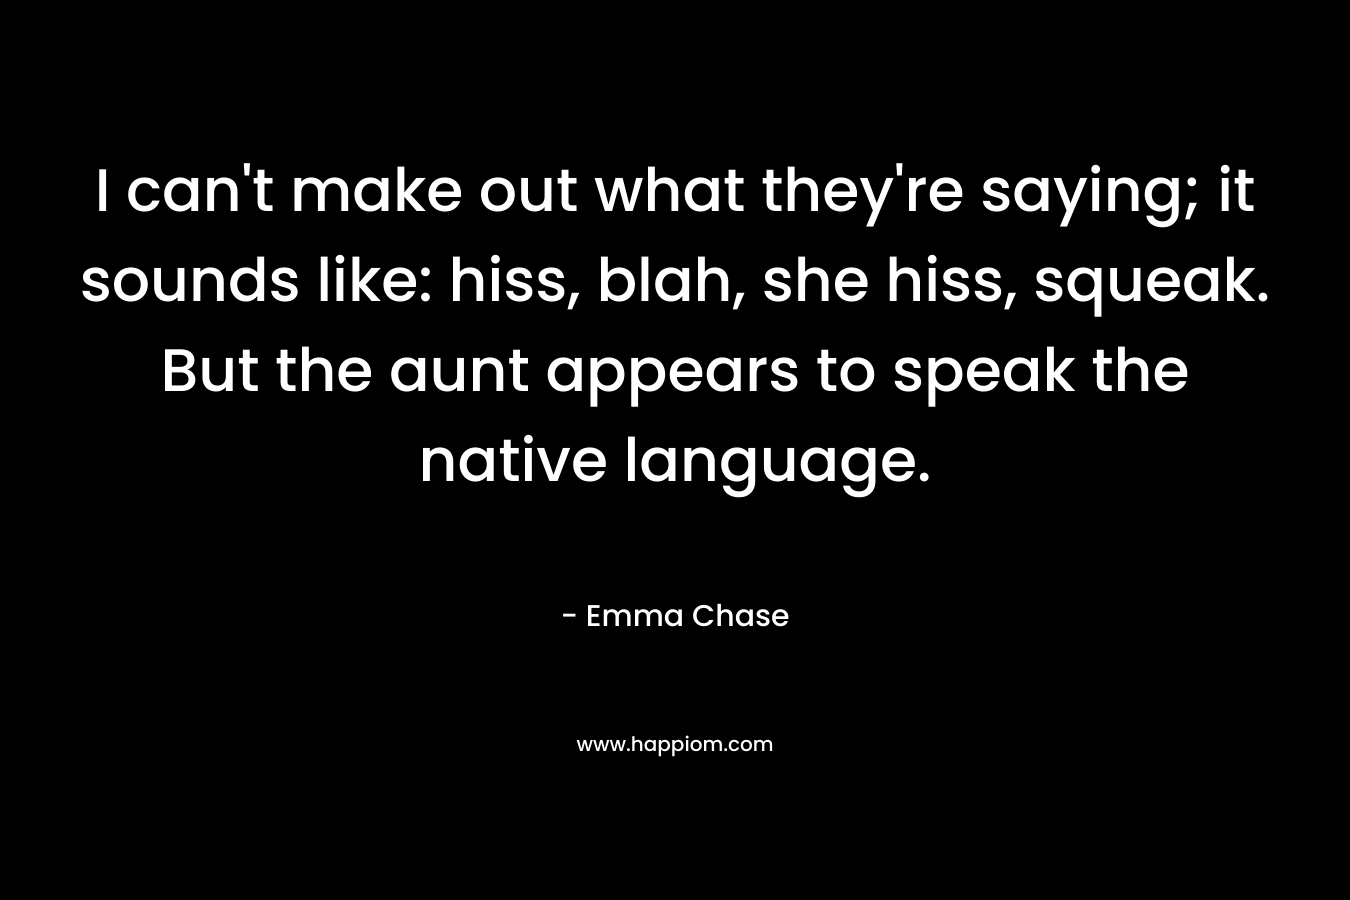 I can't make out what they're saying; it sounds like: hiss, blah, she hiss, squeak. But the aunt appears to speak the native language.